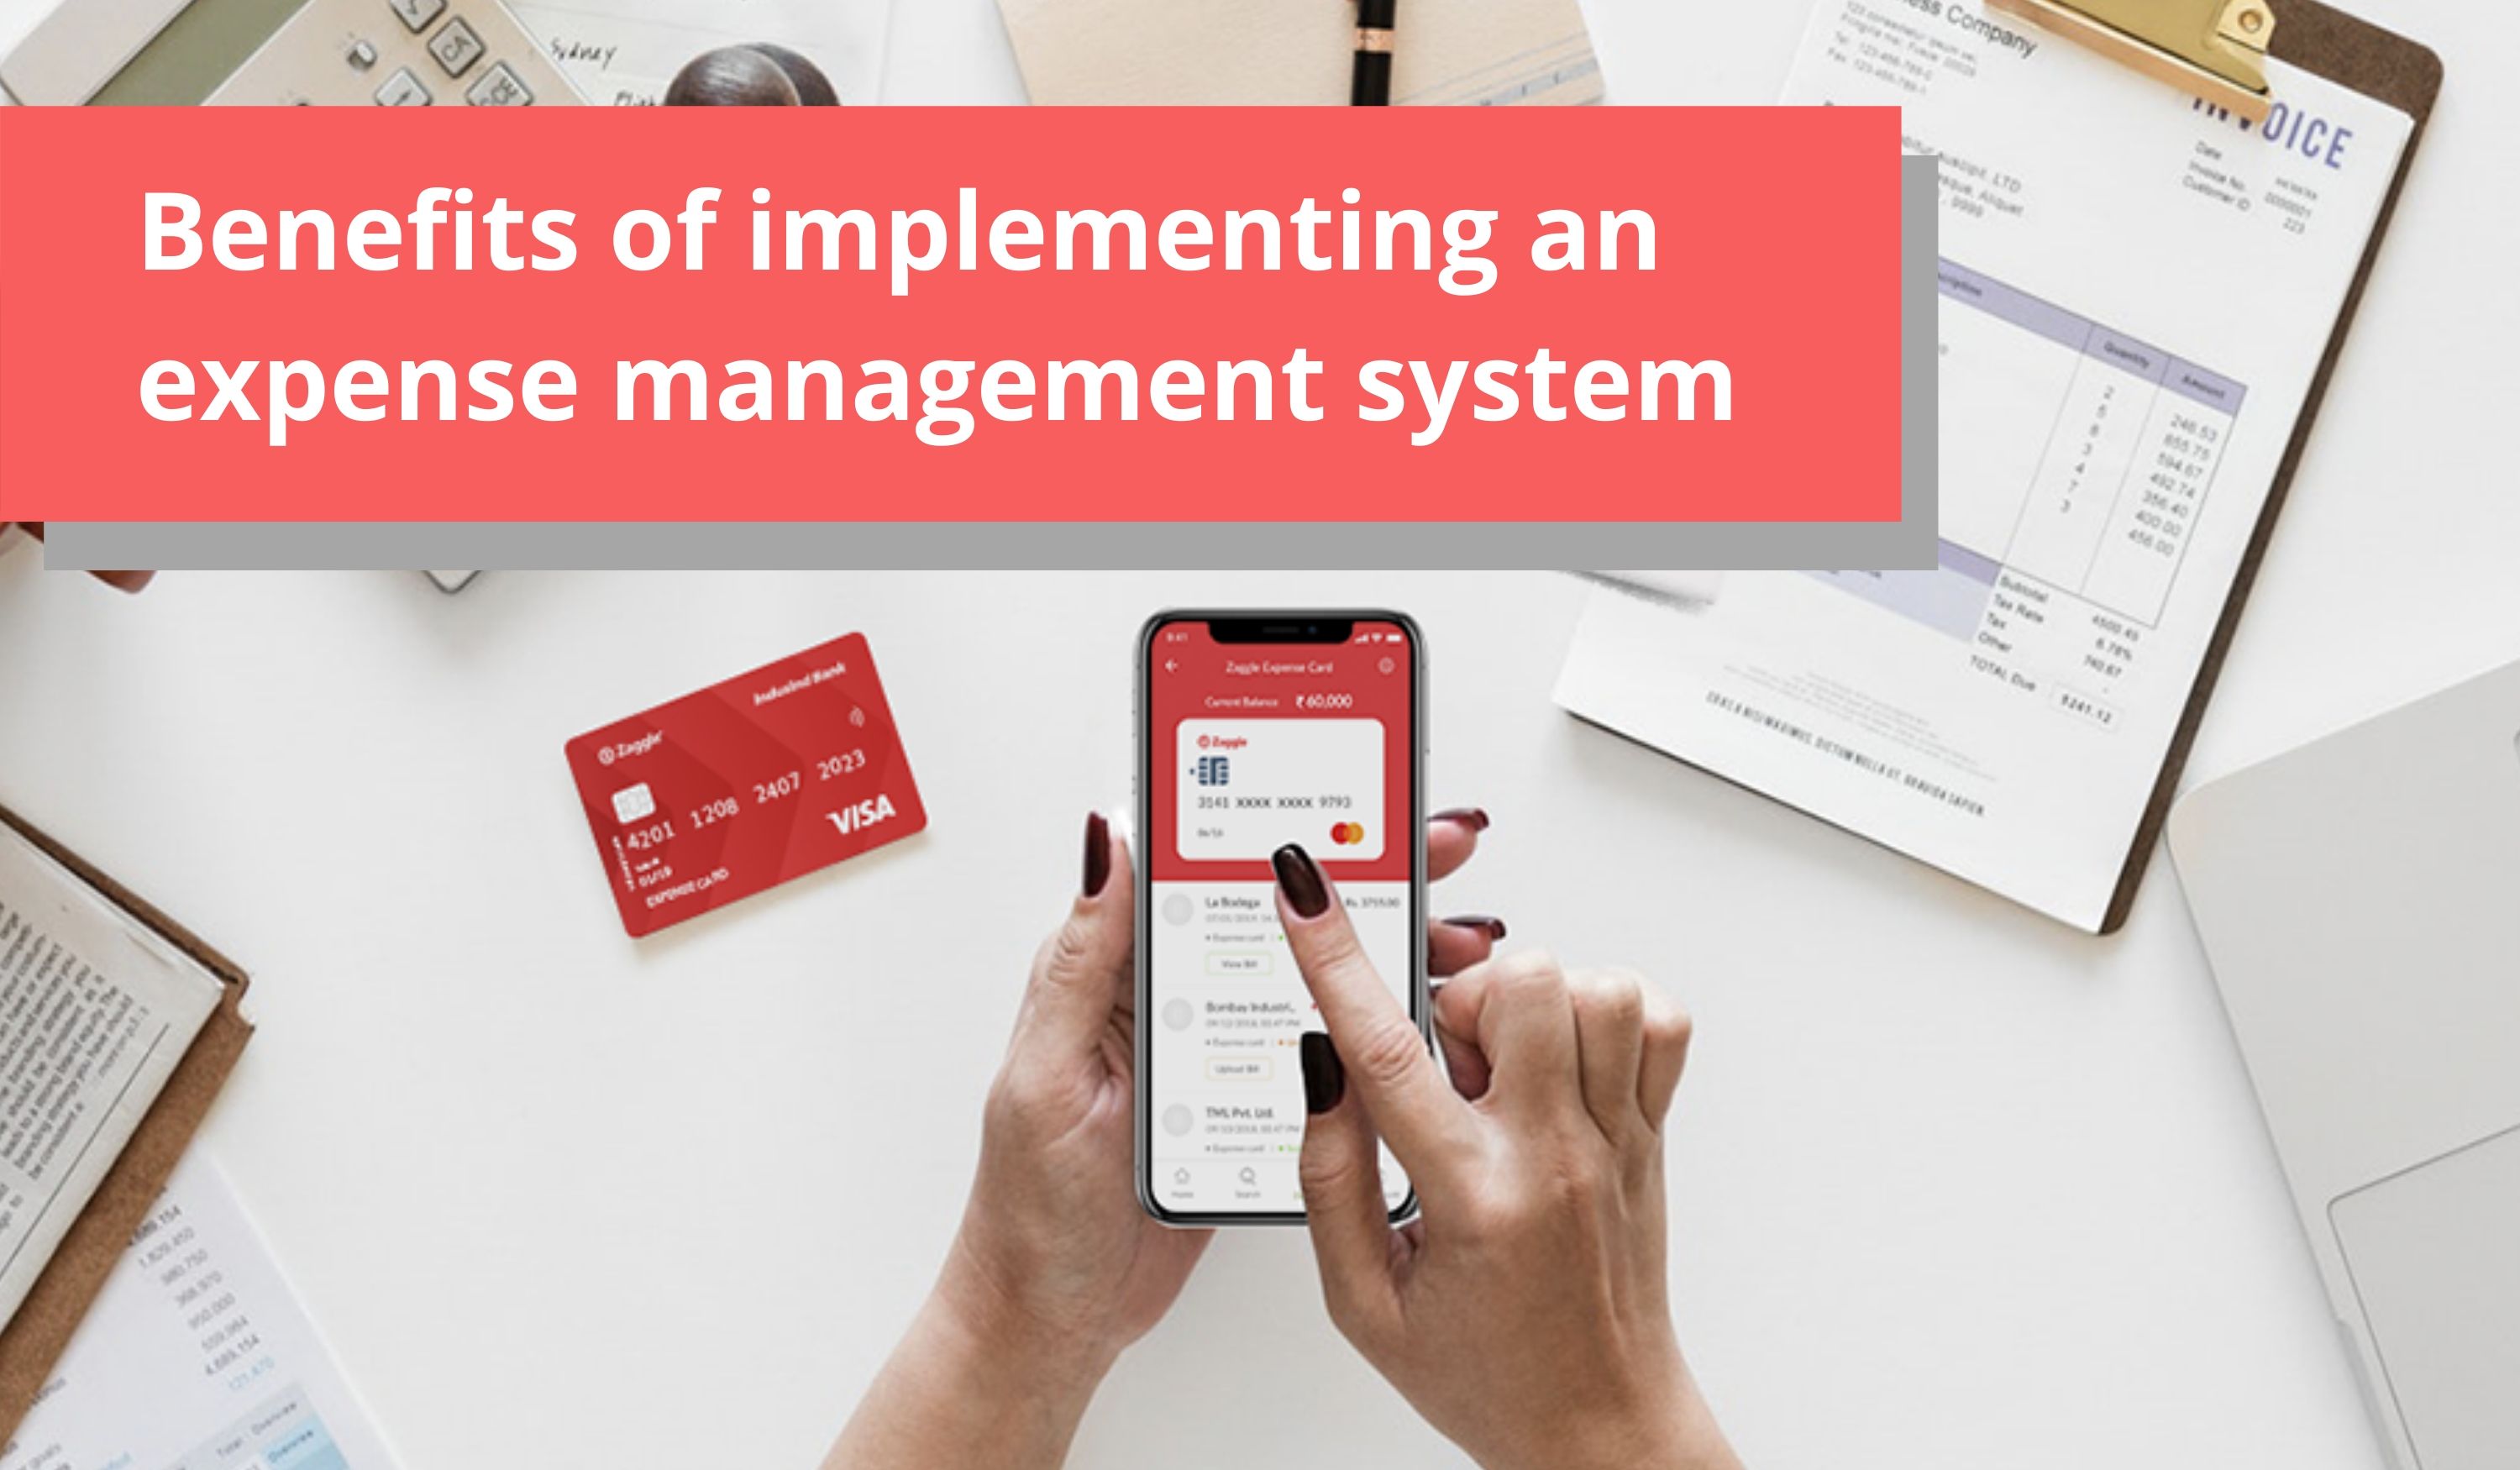 Benefits of implementing an expense management system